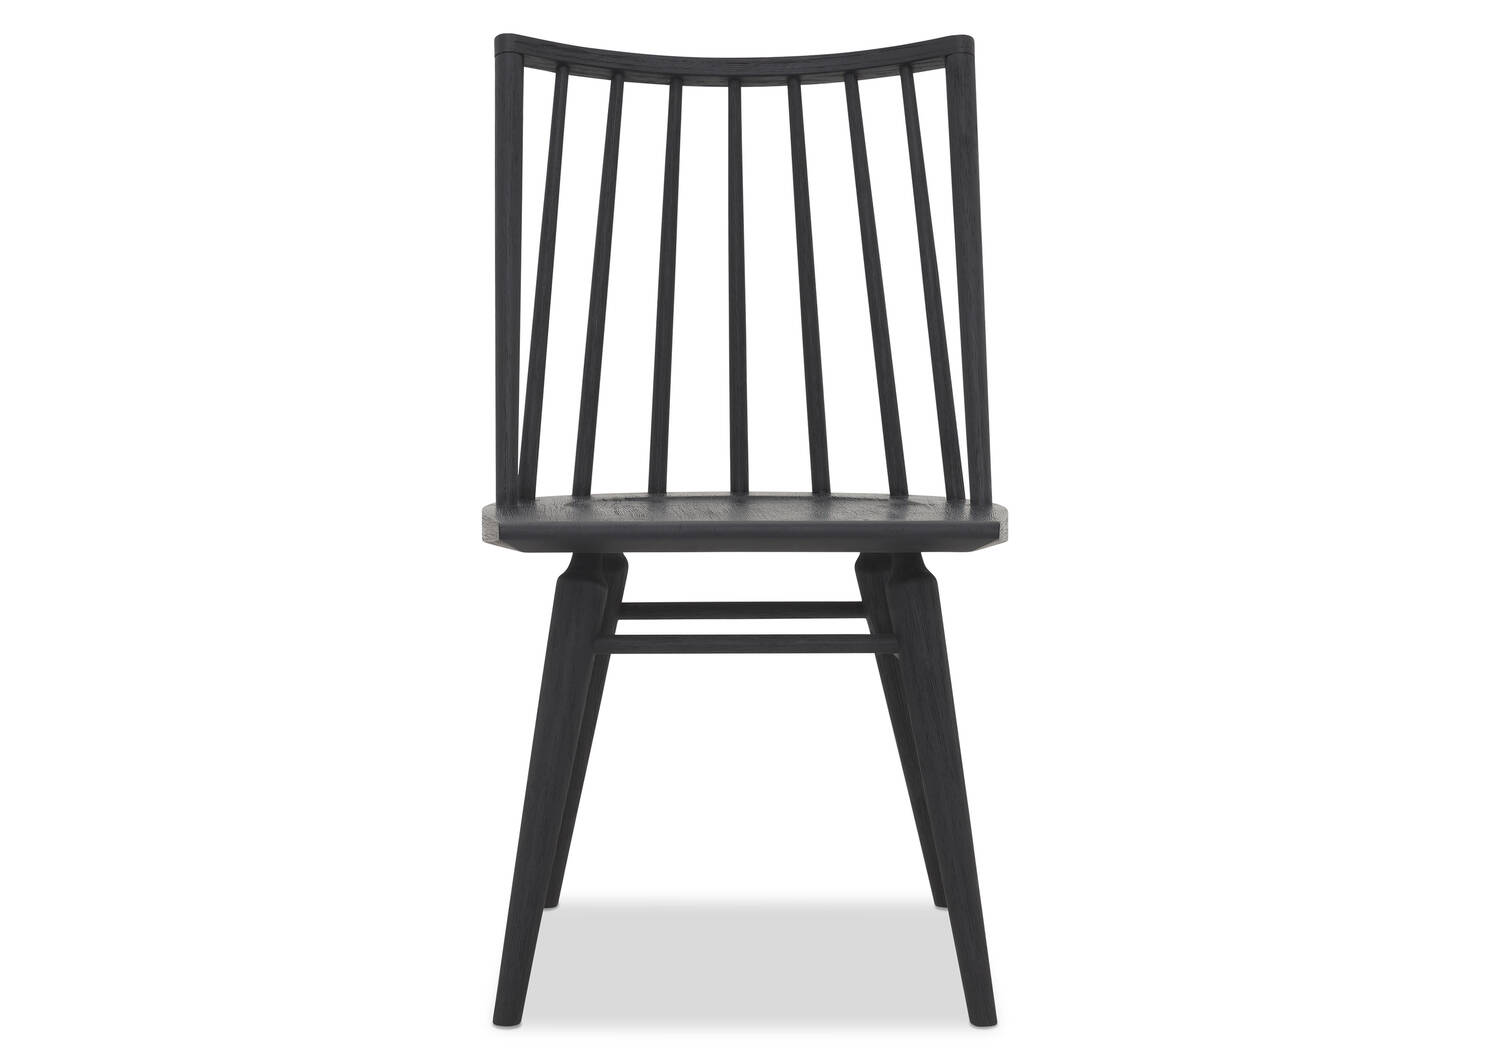 Hershel Dining Chair Yvie Black, Black Windsor Dining Chairs Canada